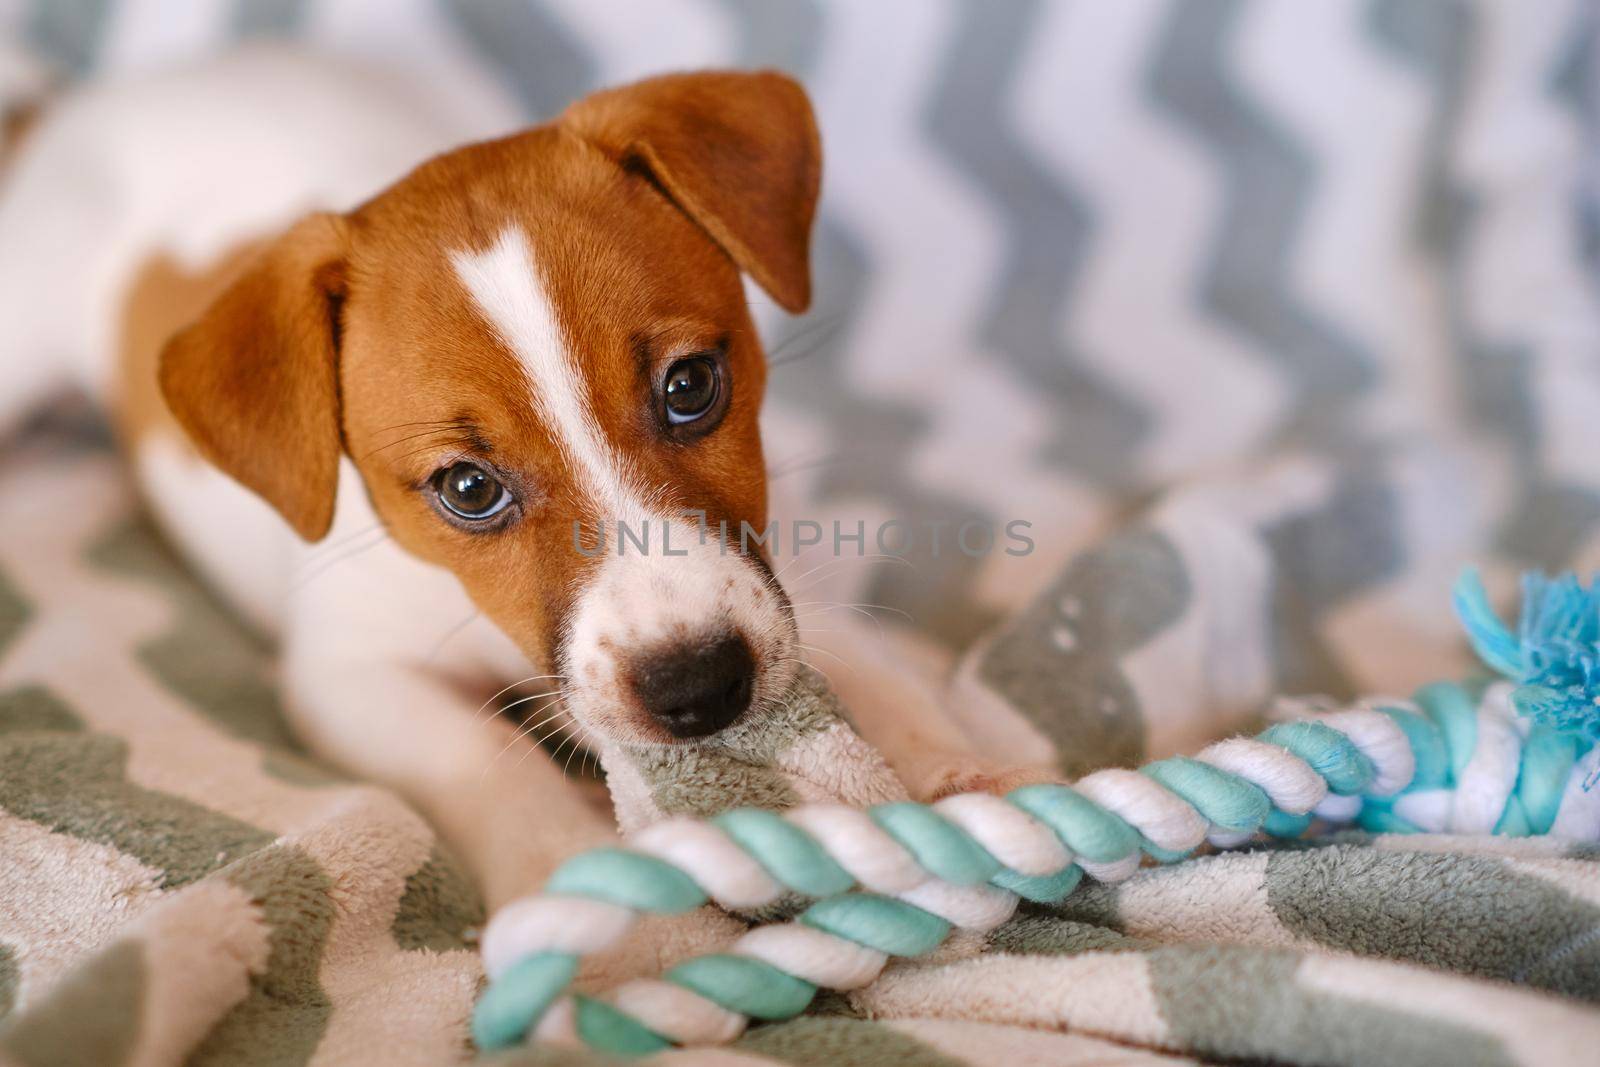 Cute Little Jack Russell Terrier puppies. Six weeks Puppy playing with toy at home